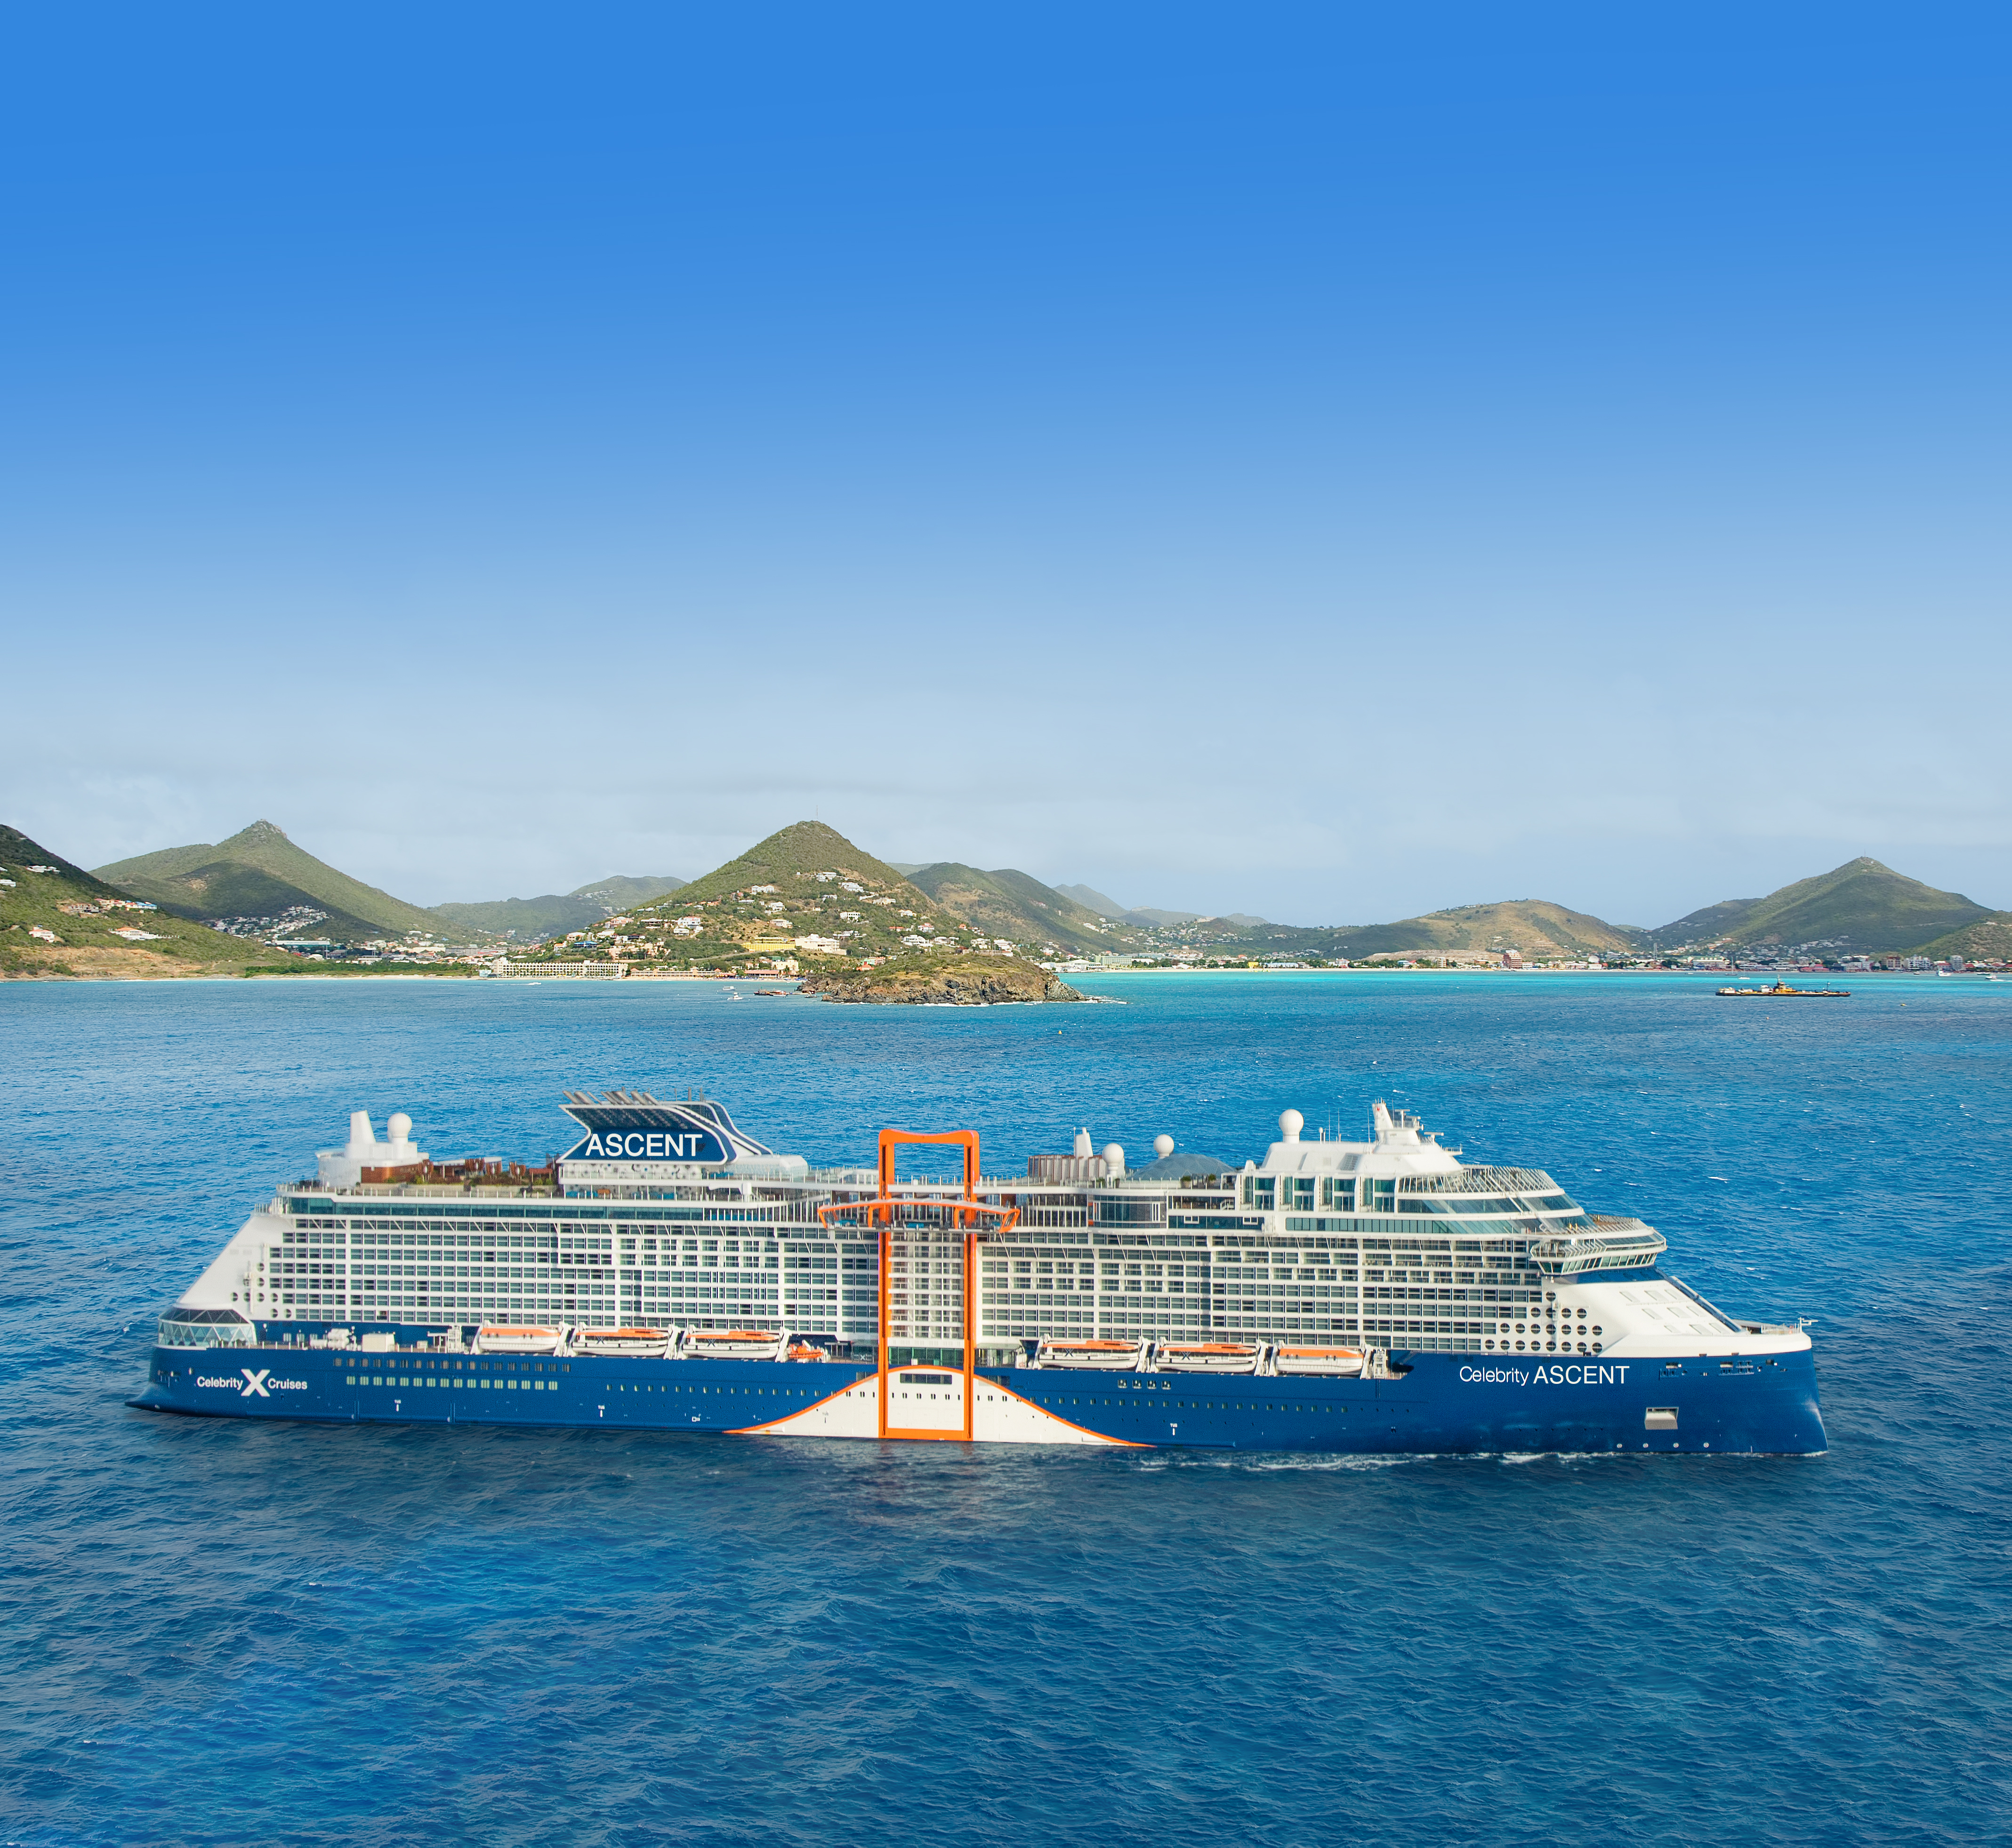 Celebrity Ascent in the Caribbean, Celebrity Cruises' newest ship launching Autumn 2023